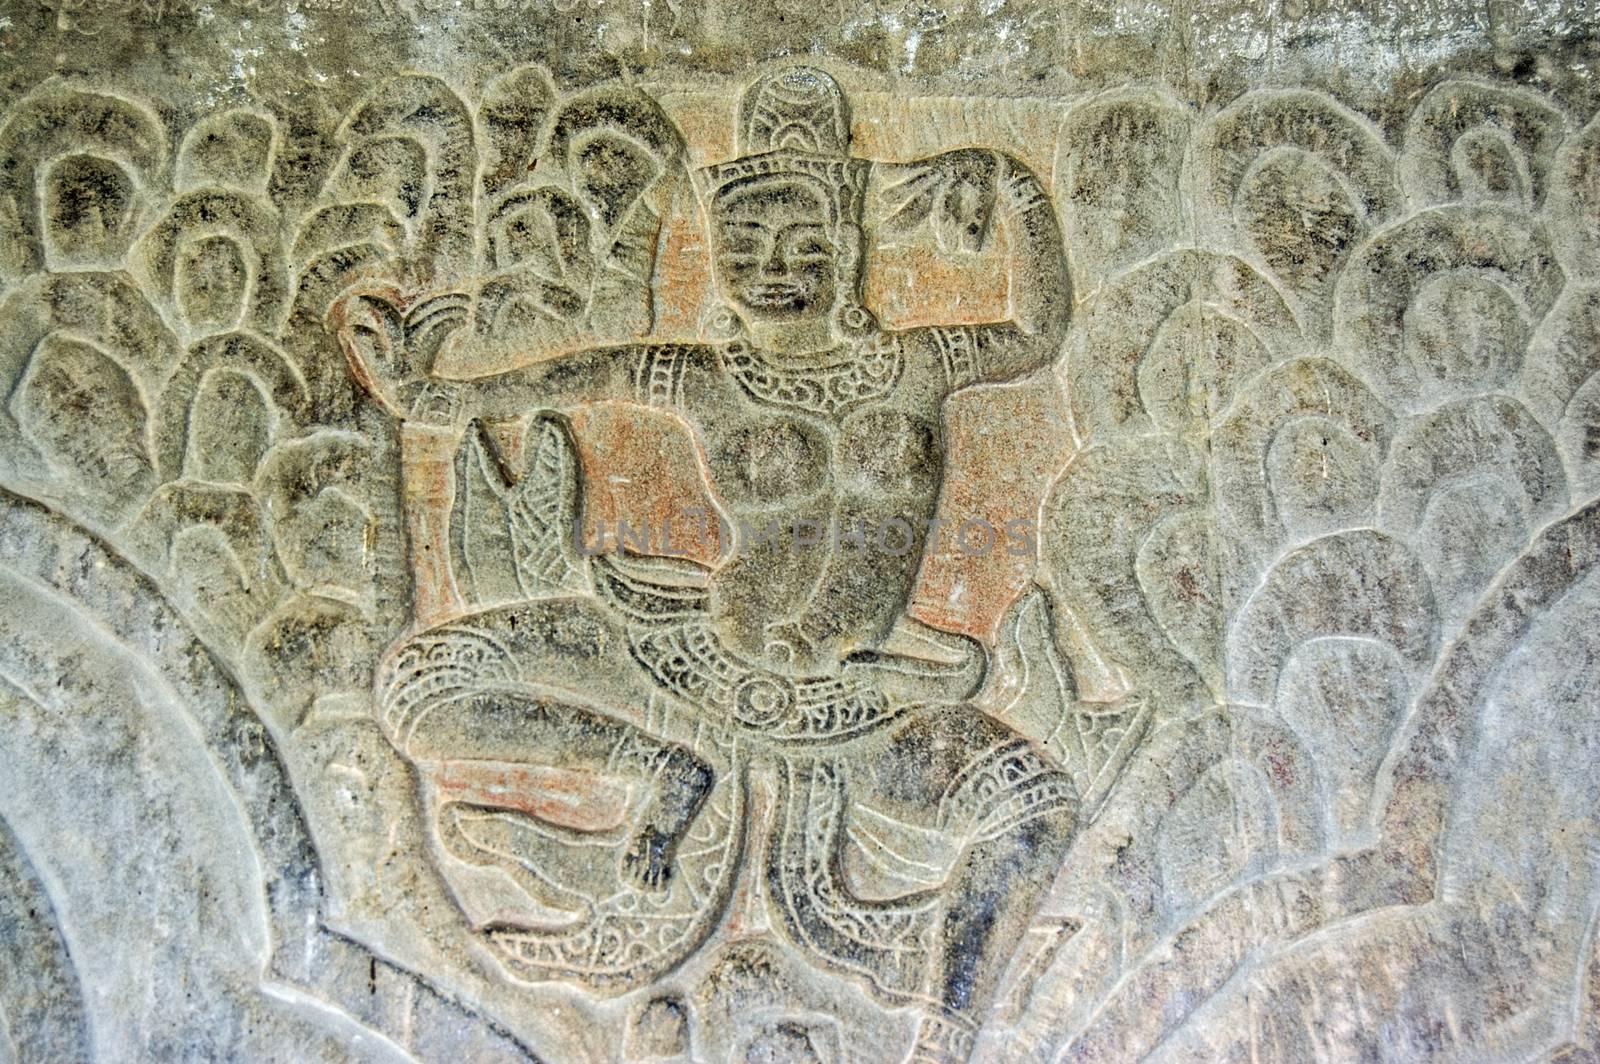 Bas relief carving of a dancing figure.  Wall of Angkor Wat Temple, Siem Reap, Cambodia.